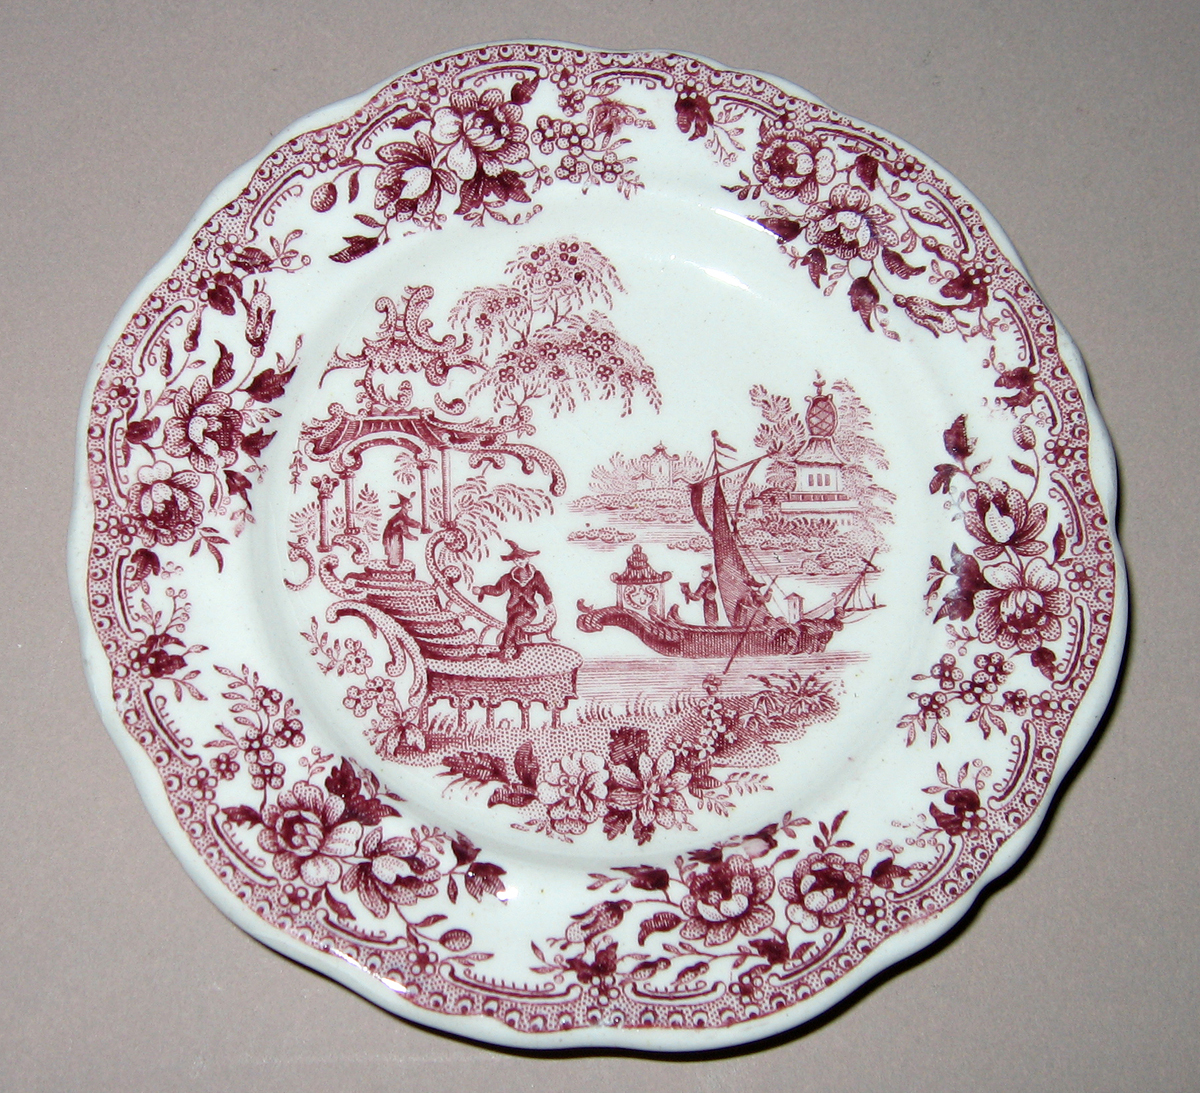 1955.0136.181 Miniature plate with chinoiserie printed scene